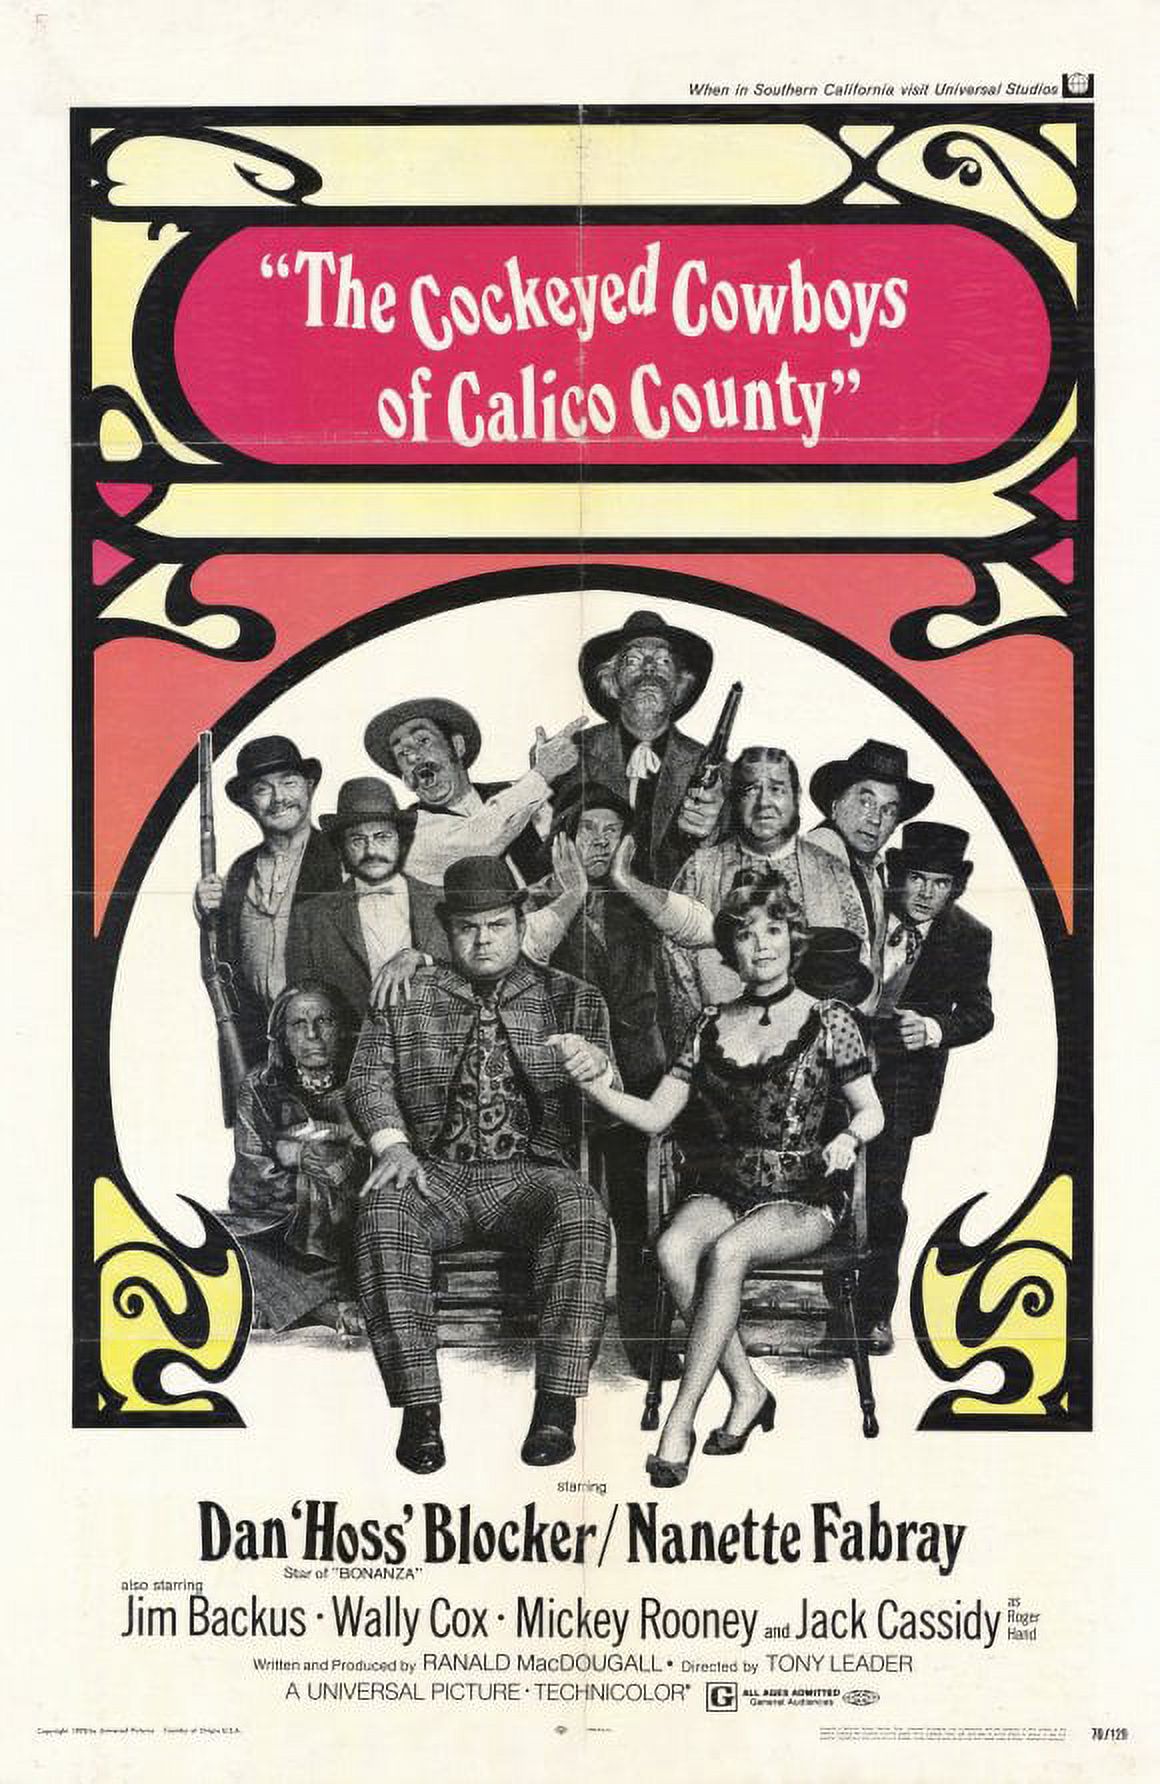 Cockeyed Cowboys of Calico County (1970) 11x17 Movie Poster - image 1 of 2